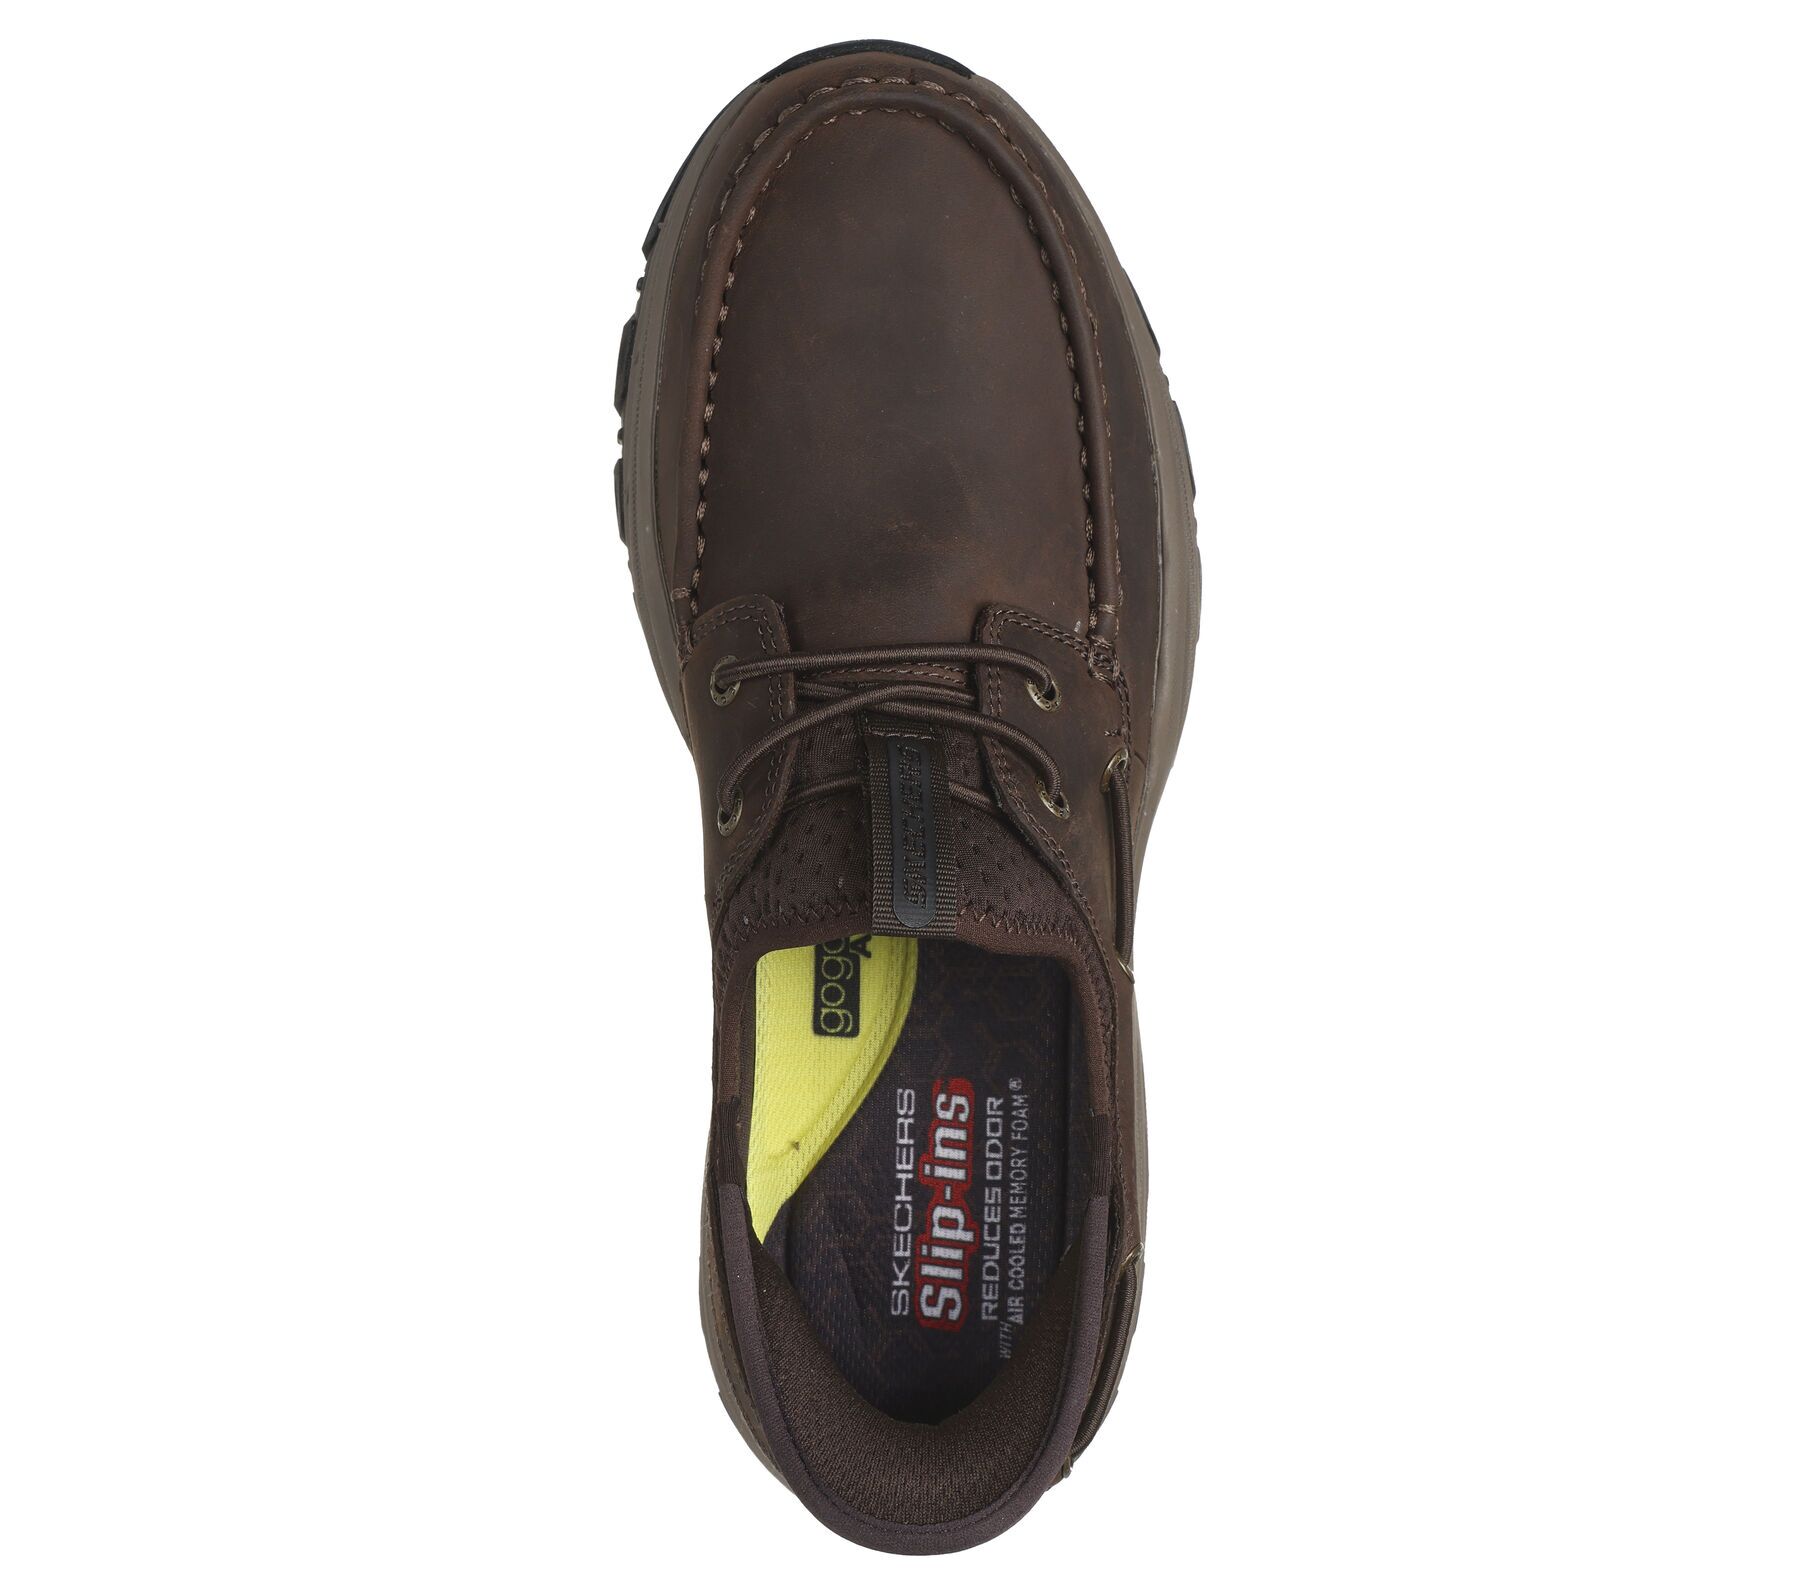 Men's Slip-ins RF: Knowlson - Shore Thing Shoes in Cocoa